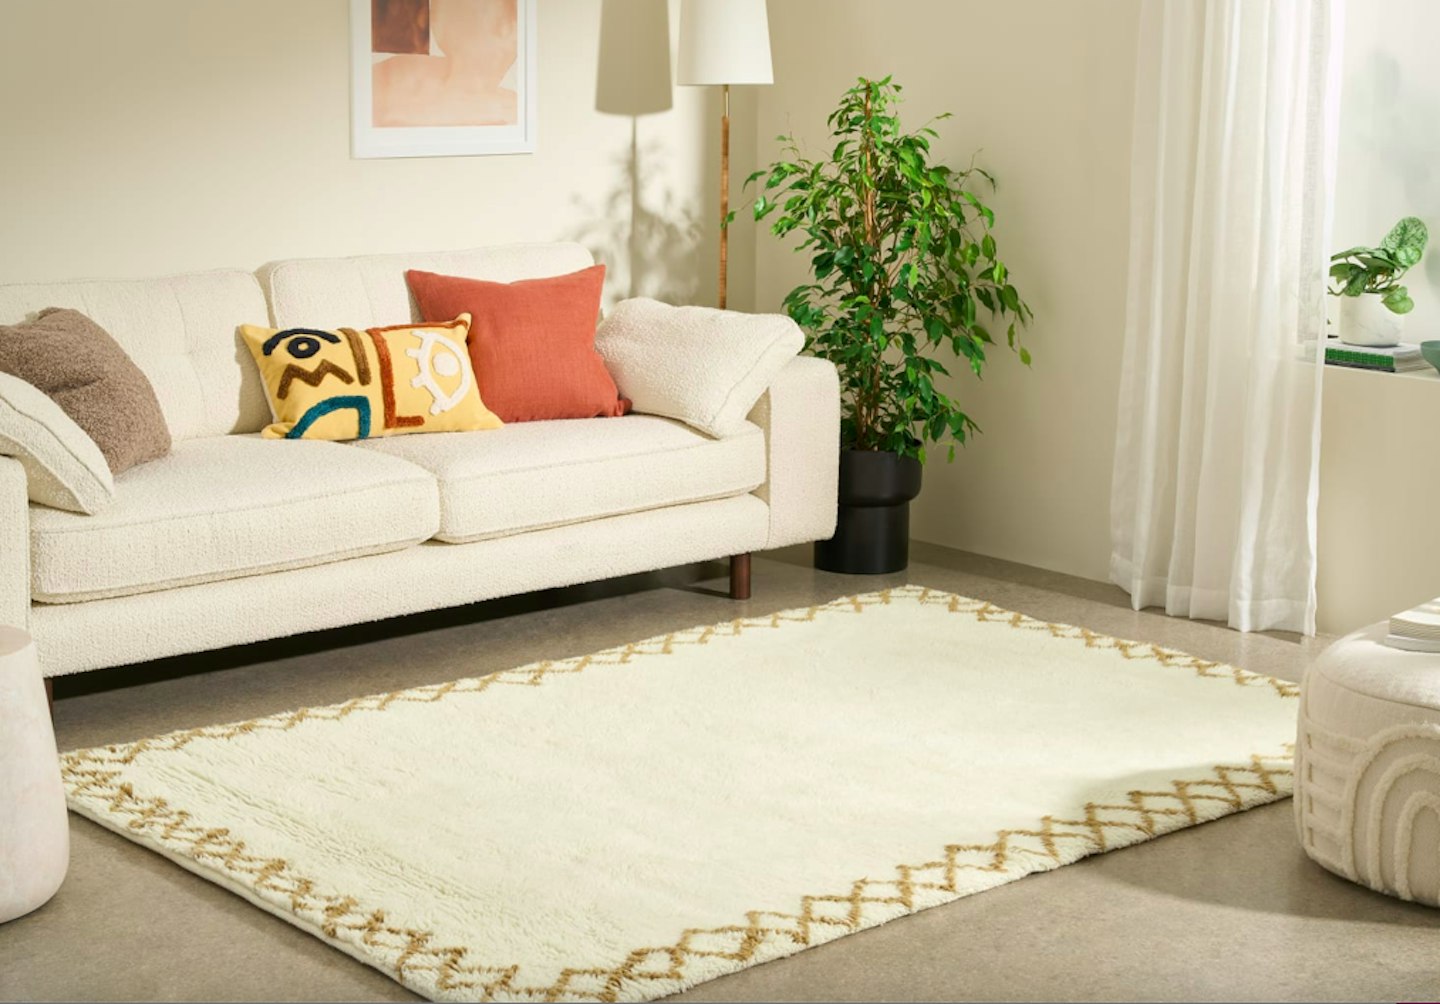 MADE, Heijer  Washed Shaggy 100% Wool Rug, Large 160 x 230 cm, Off-White & Tan, WAS £385 NOW £169